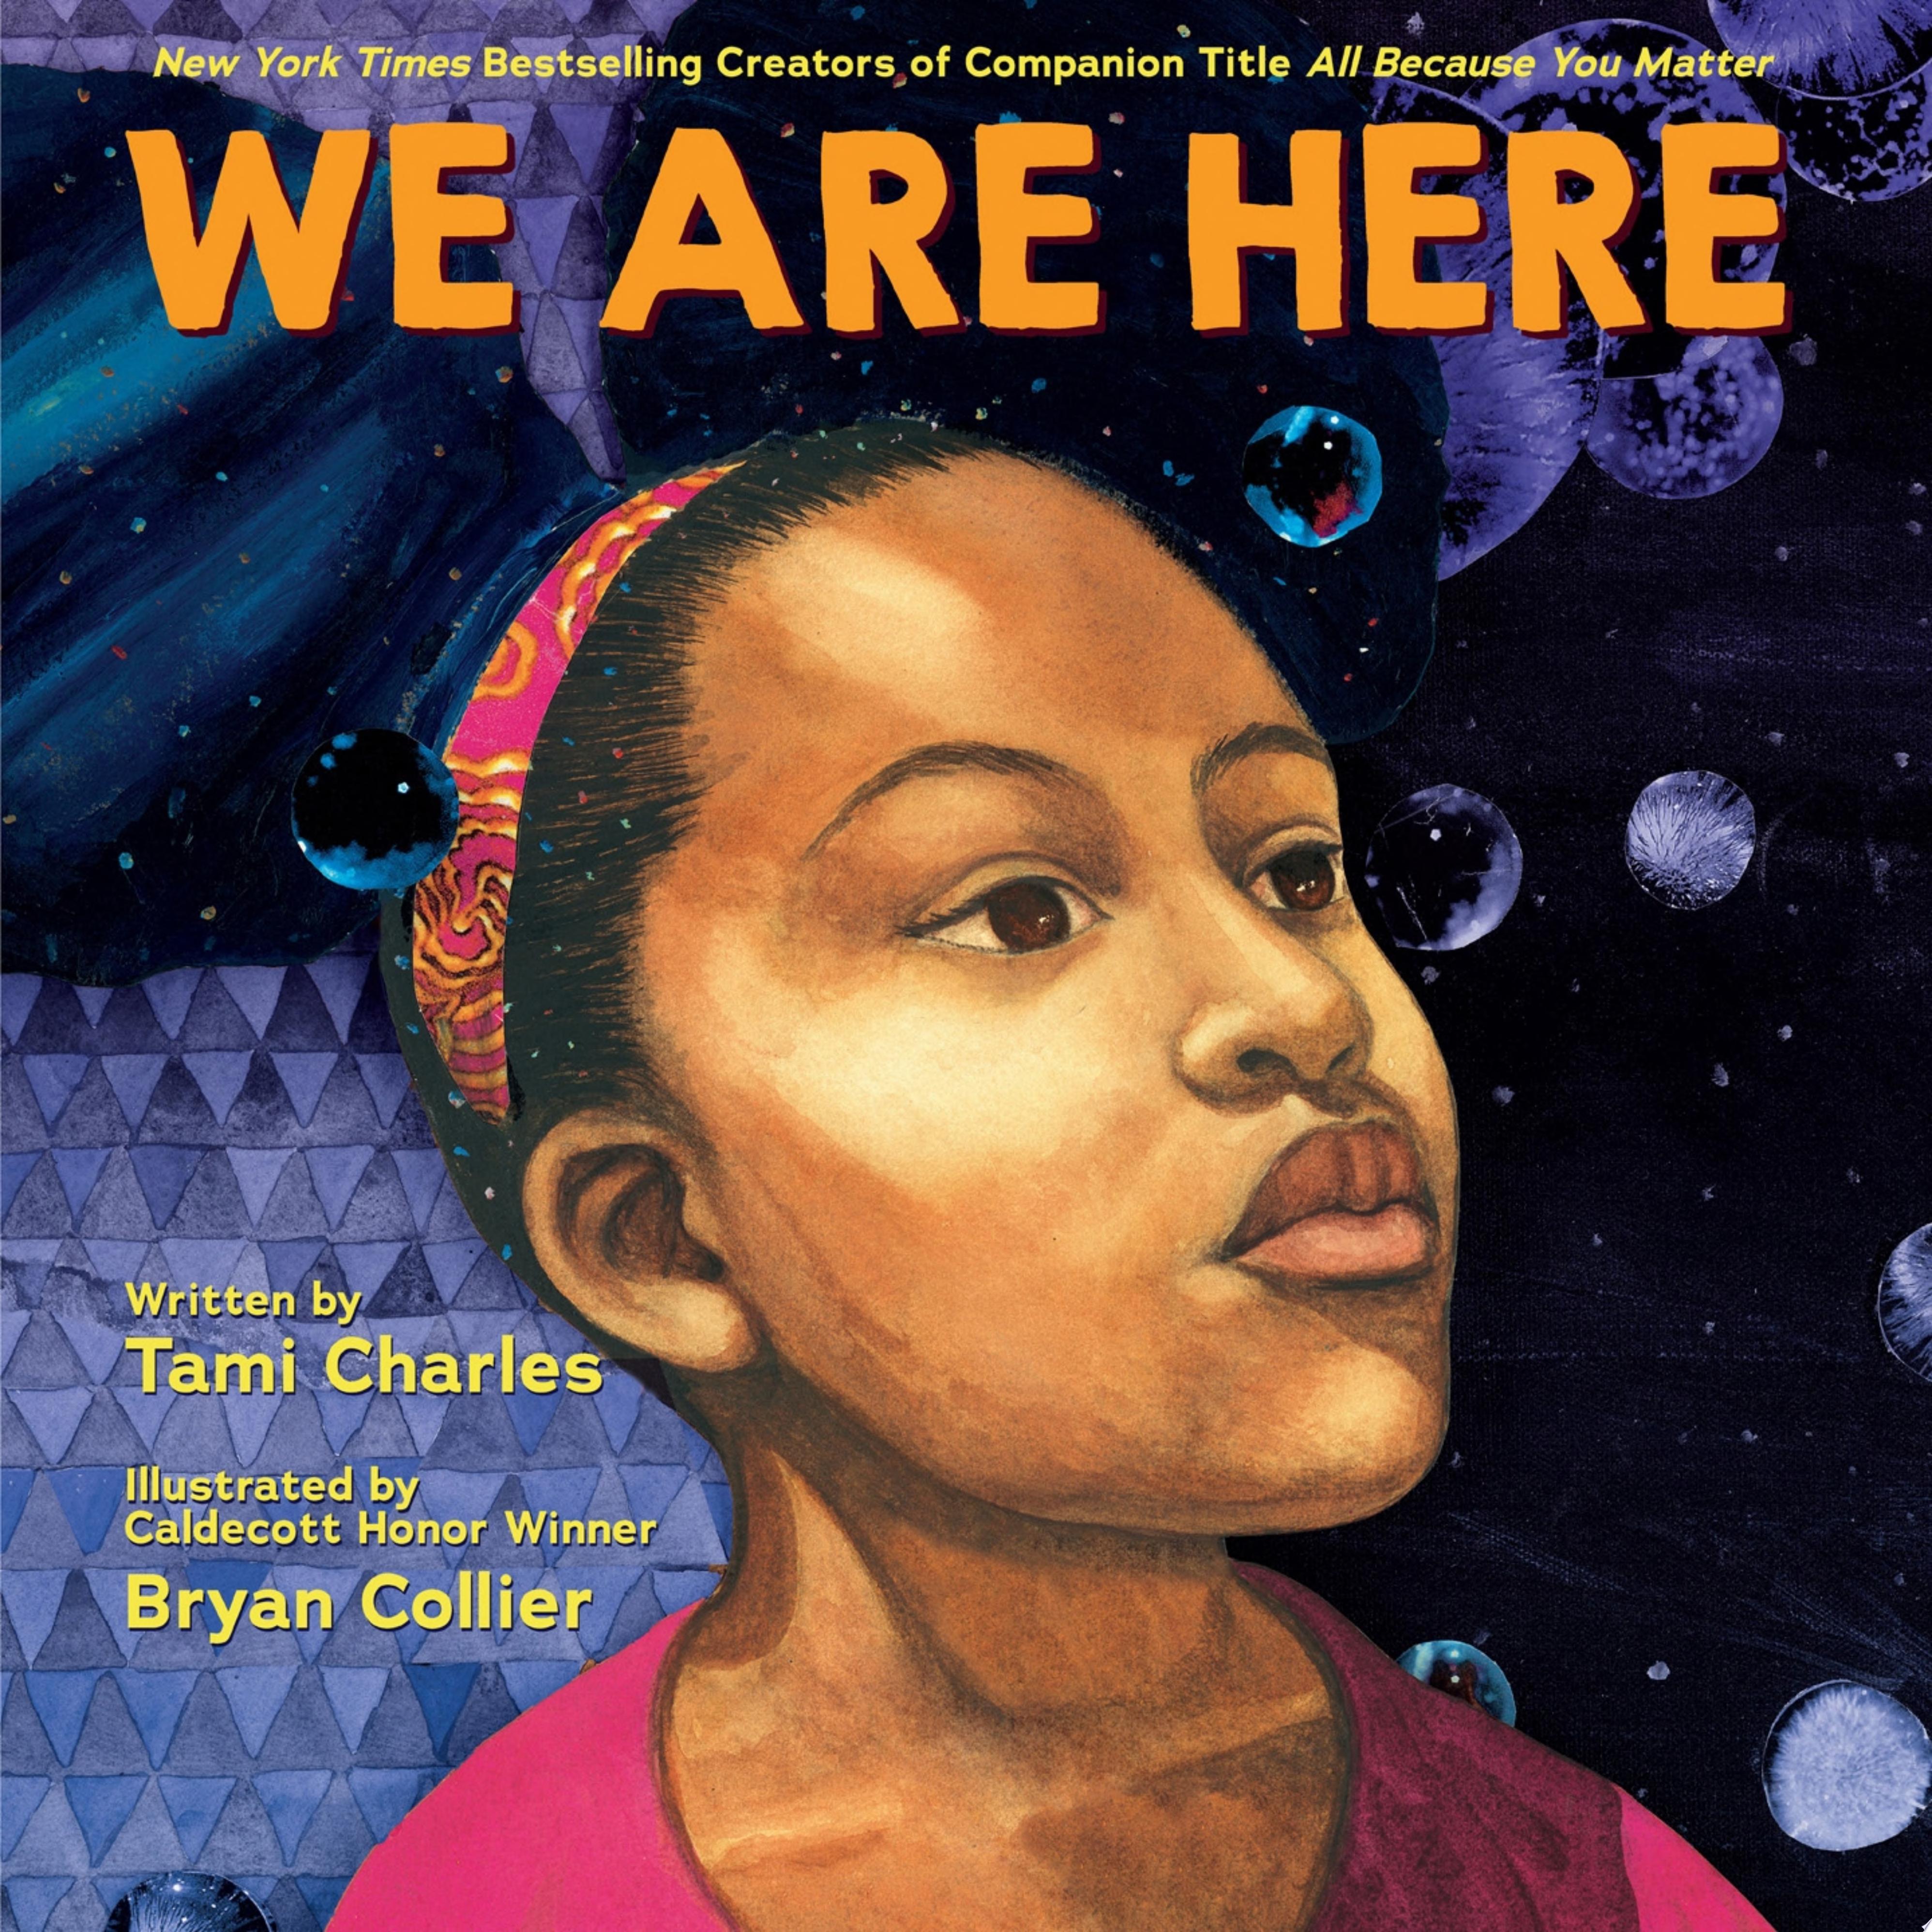 Image for "We Are Here (An All Because You Matter Book)"